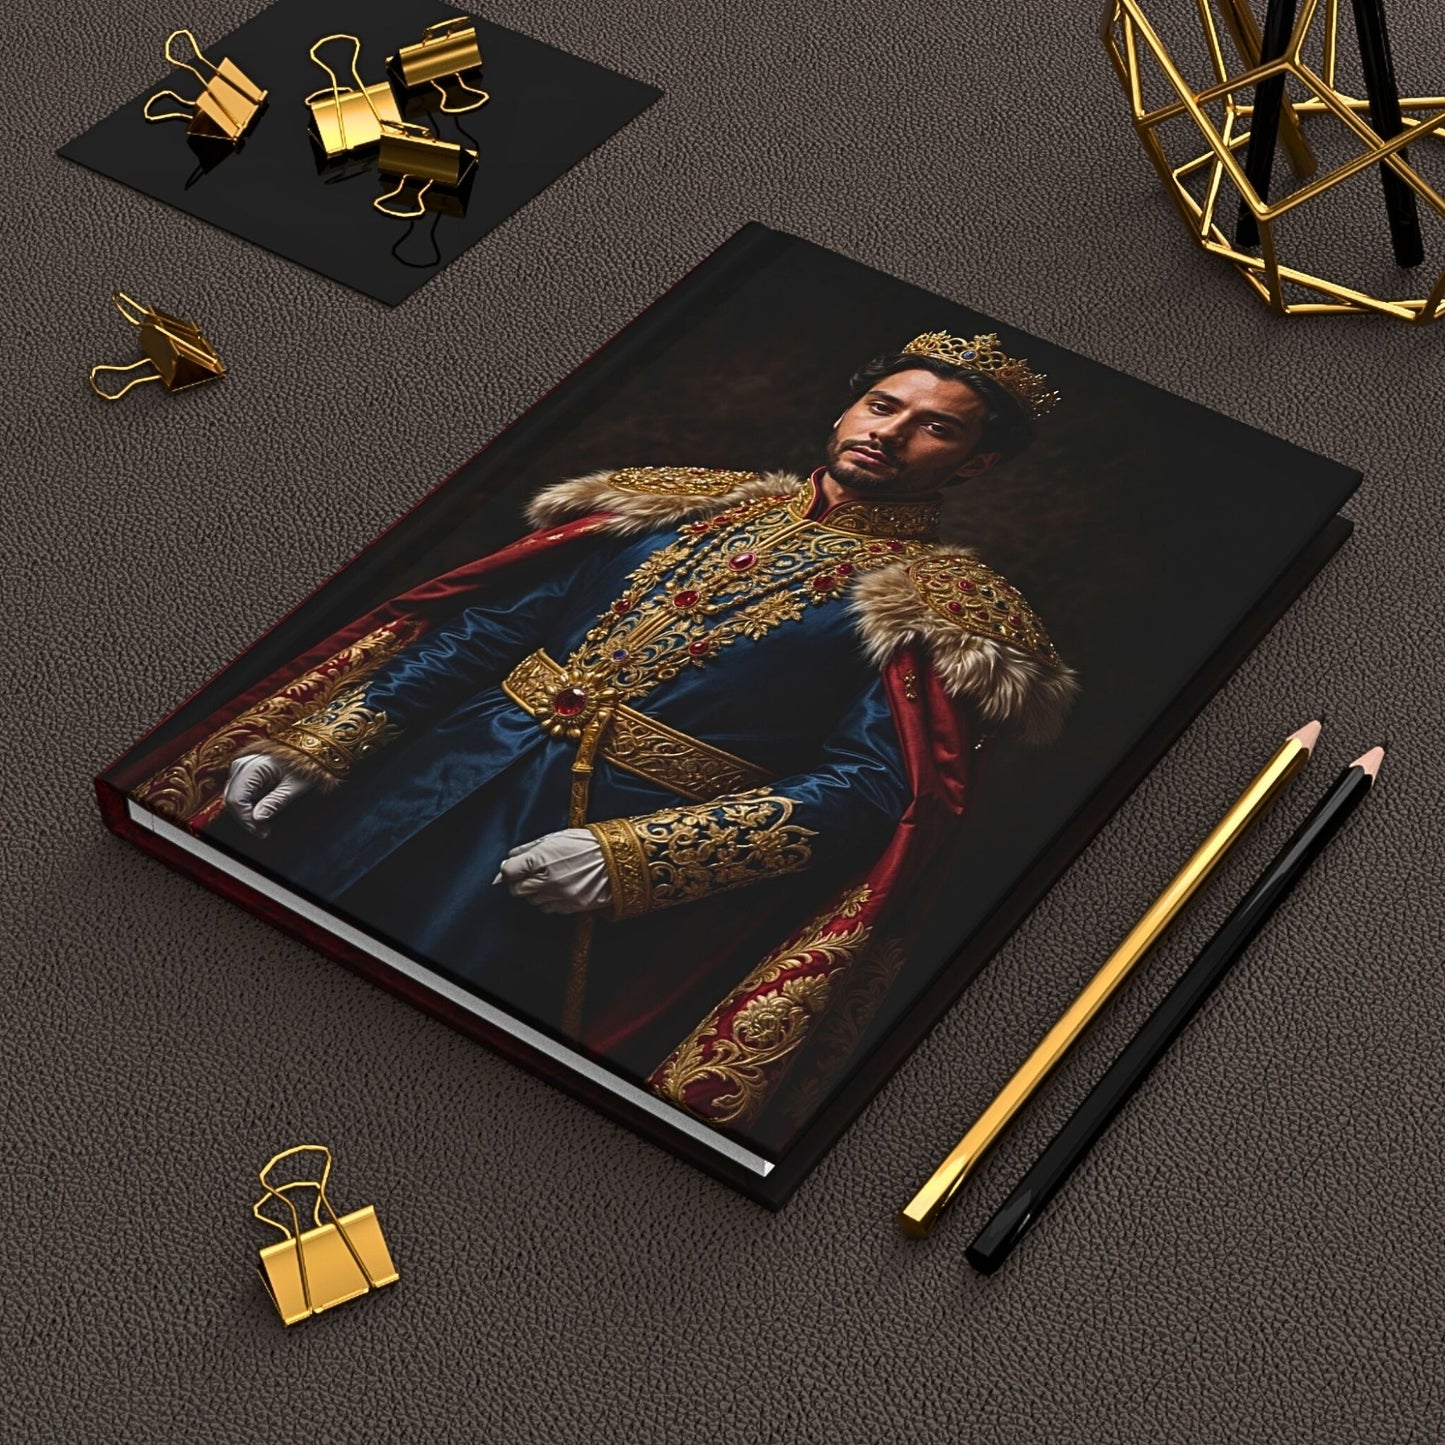 Discover bespoke elegance with our Custom Photo Journals, crafted for husbands and boyfriends. Personalize your gift with our Royal Journal or Renaissance Couple Journal, ideal for commemorating milestones and special moments. Explore our unique collection and find the perfect personalized gift that celebrates love and connection.